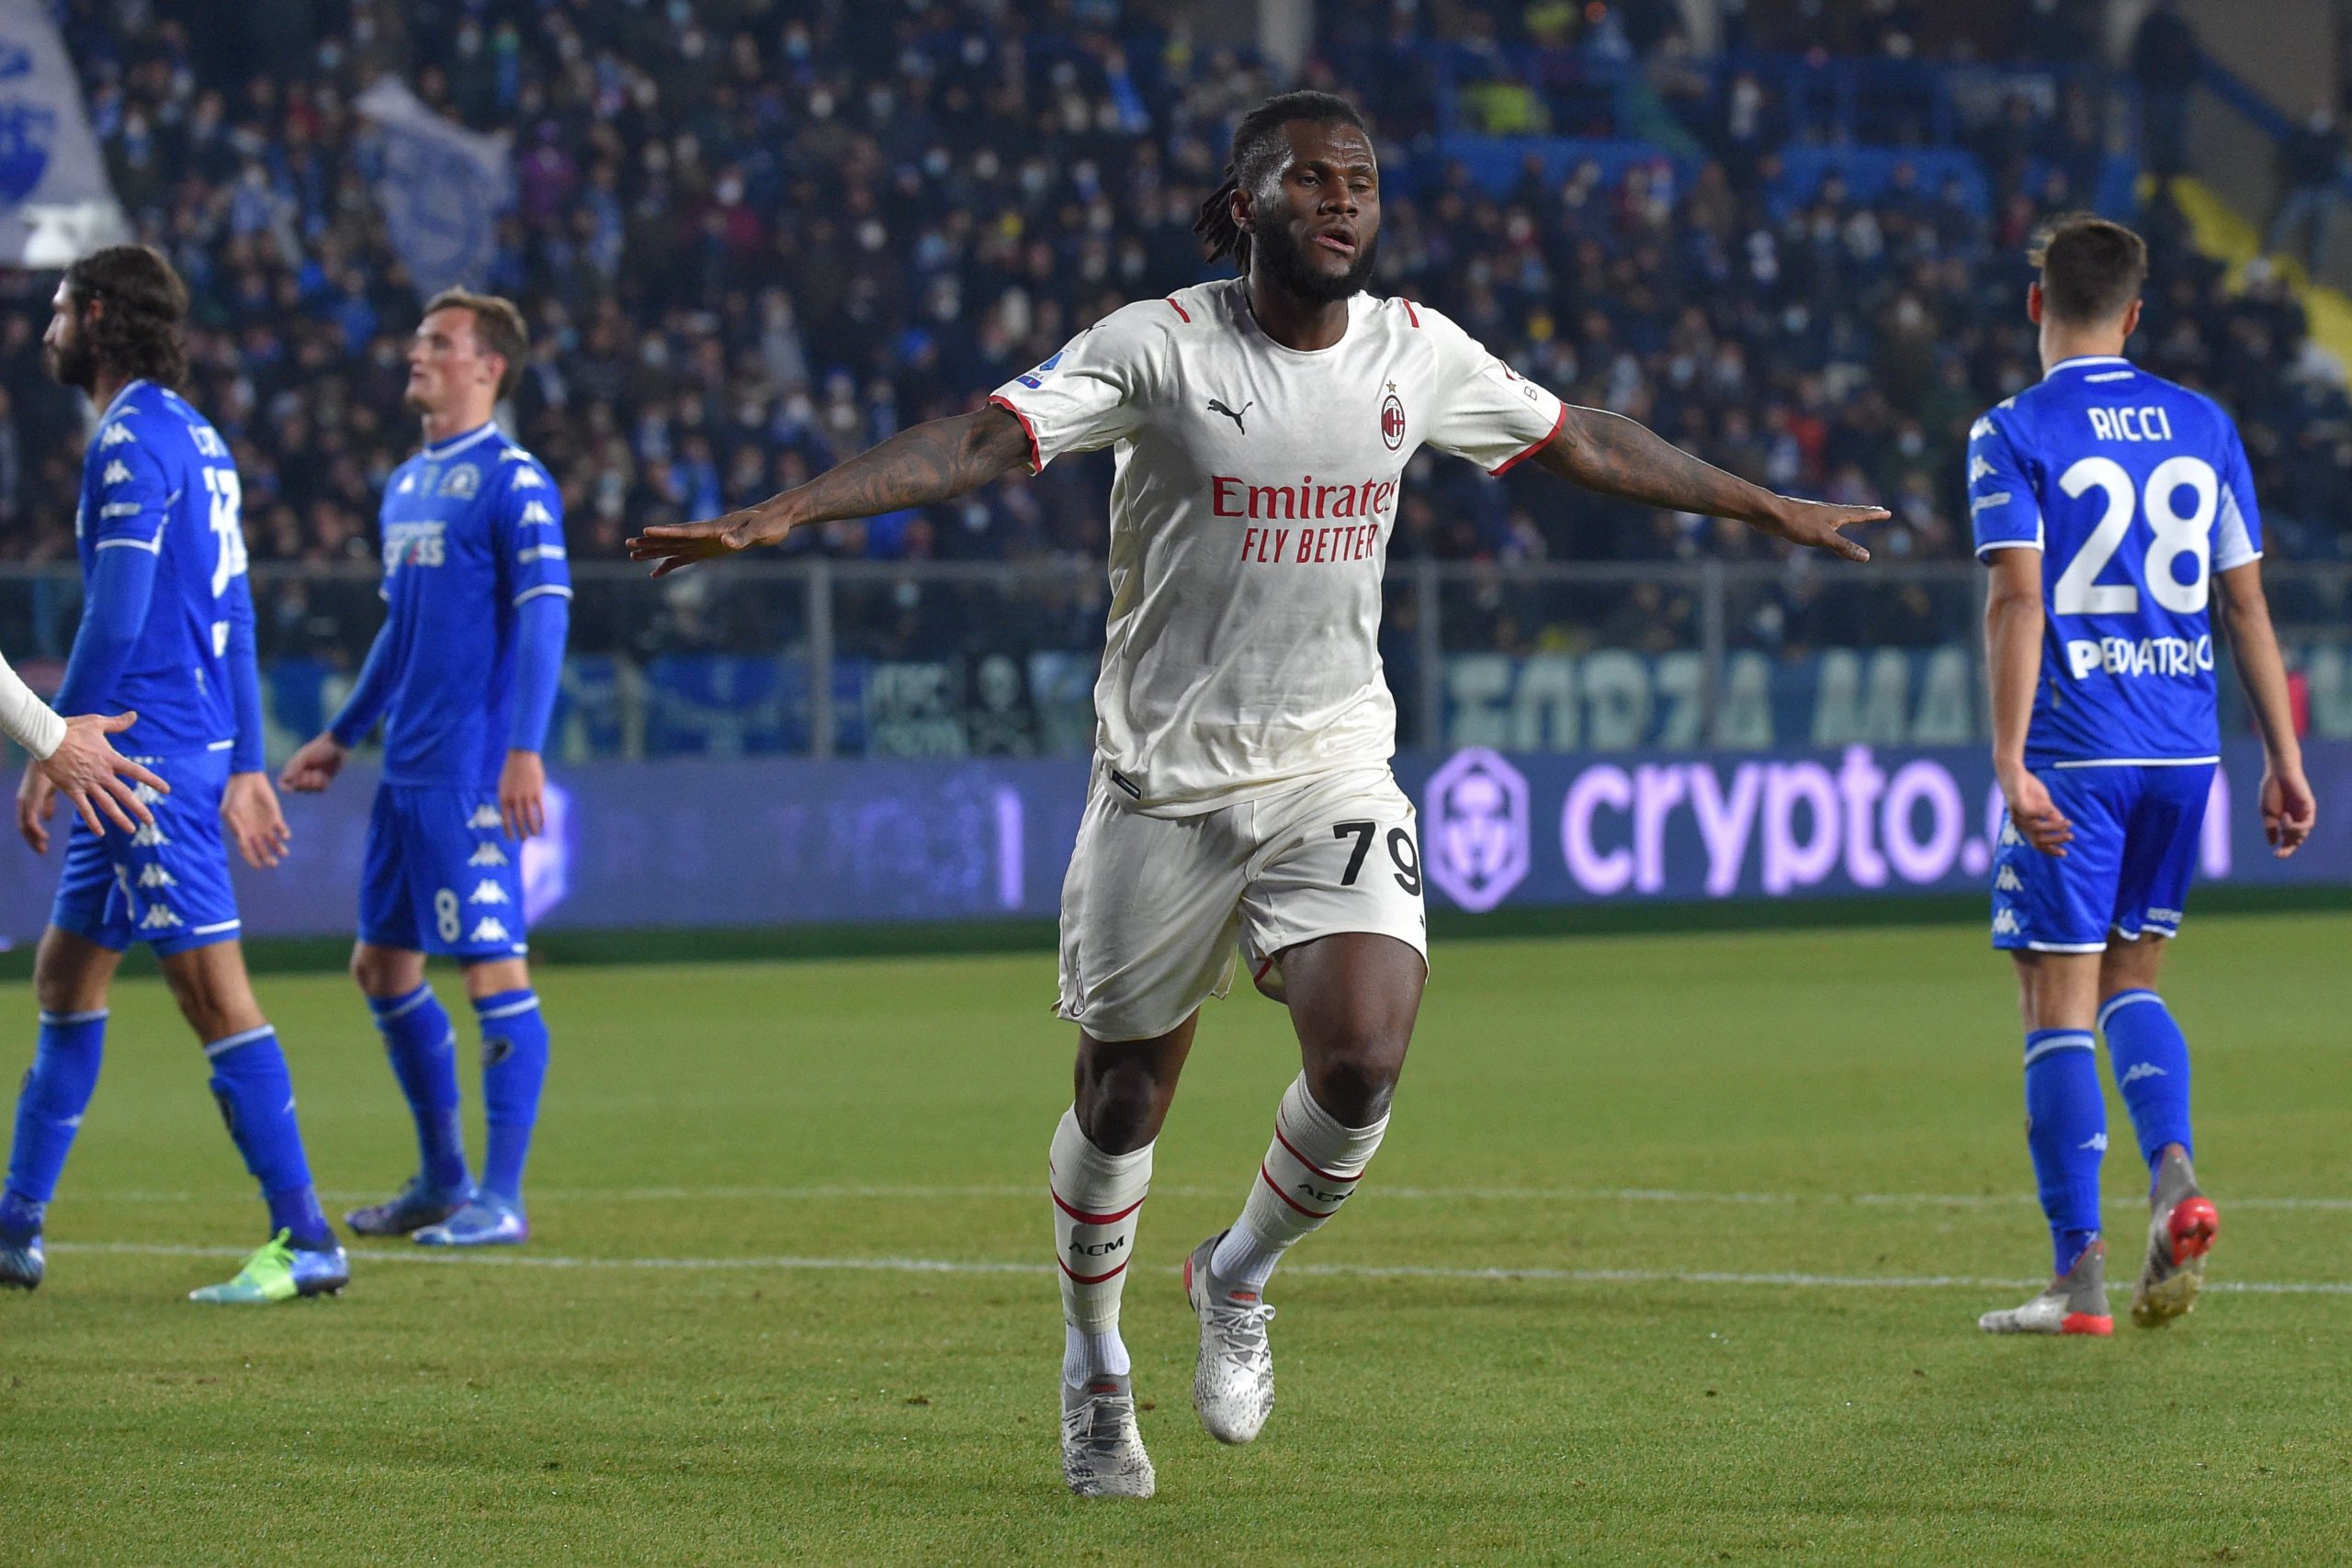 AC Milan's Ivorian midfielder Franck Kessie celebrates after opening the scoring during the Italian Serie A football match between Empoli and AC Milan on December 22, 2021 at the Carlo-Castellani stadium in Empoli. (Photo by Andreas SOLARO / AFP) (Photo by ANDREAS SOLARO/AFP via Getty Images)The 4th Official uses images provided by the following image agency: Getty Images (https://www.gettyimages.de/) Imago Images (https://www.imago-images.de/)